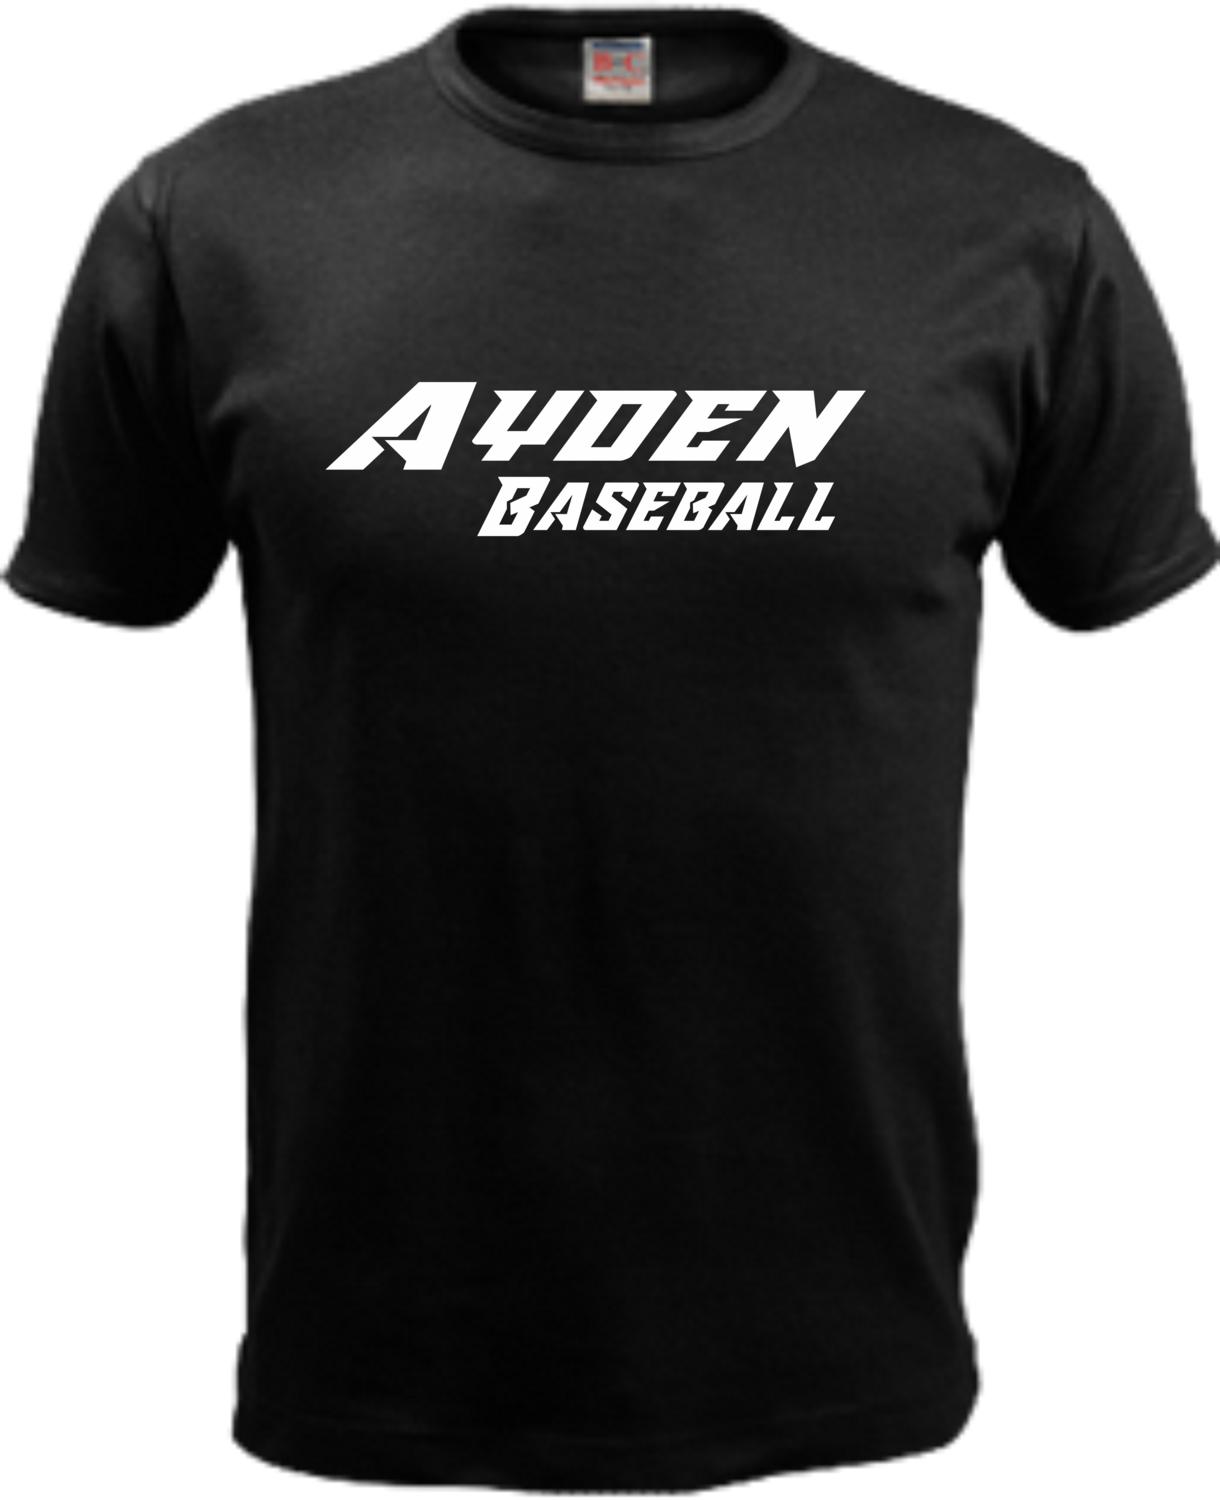 Short-Sleeve Performance T-shirt - Adult & Youth